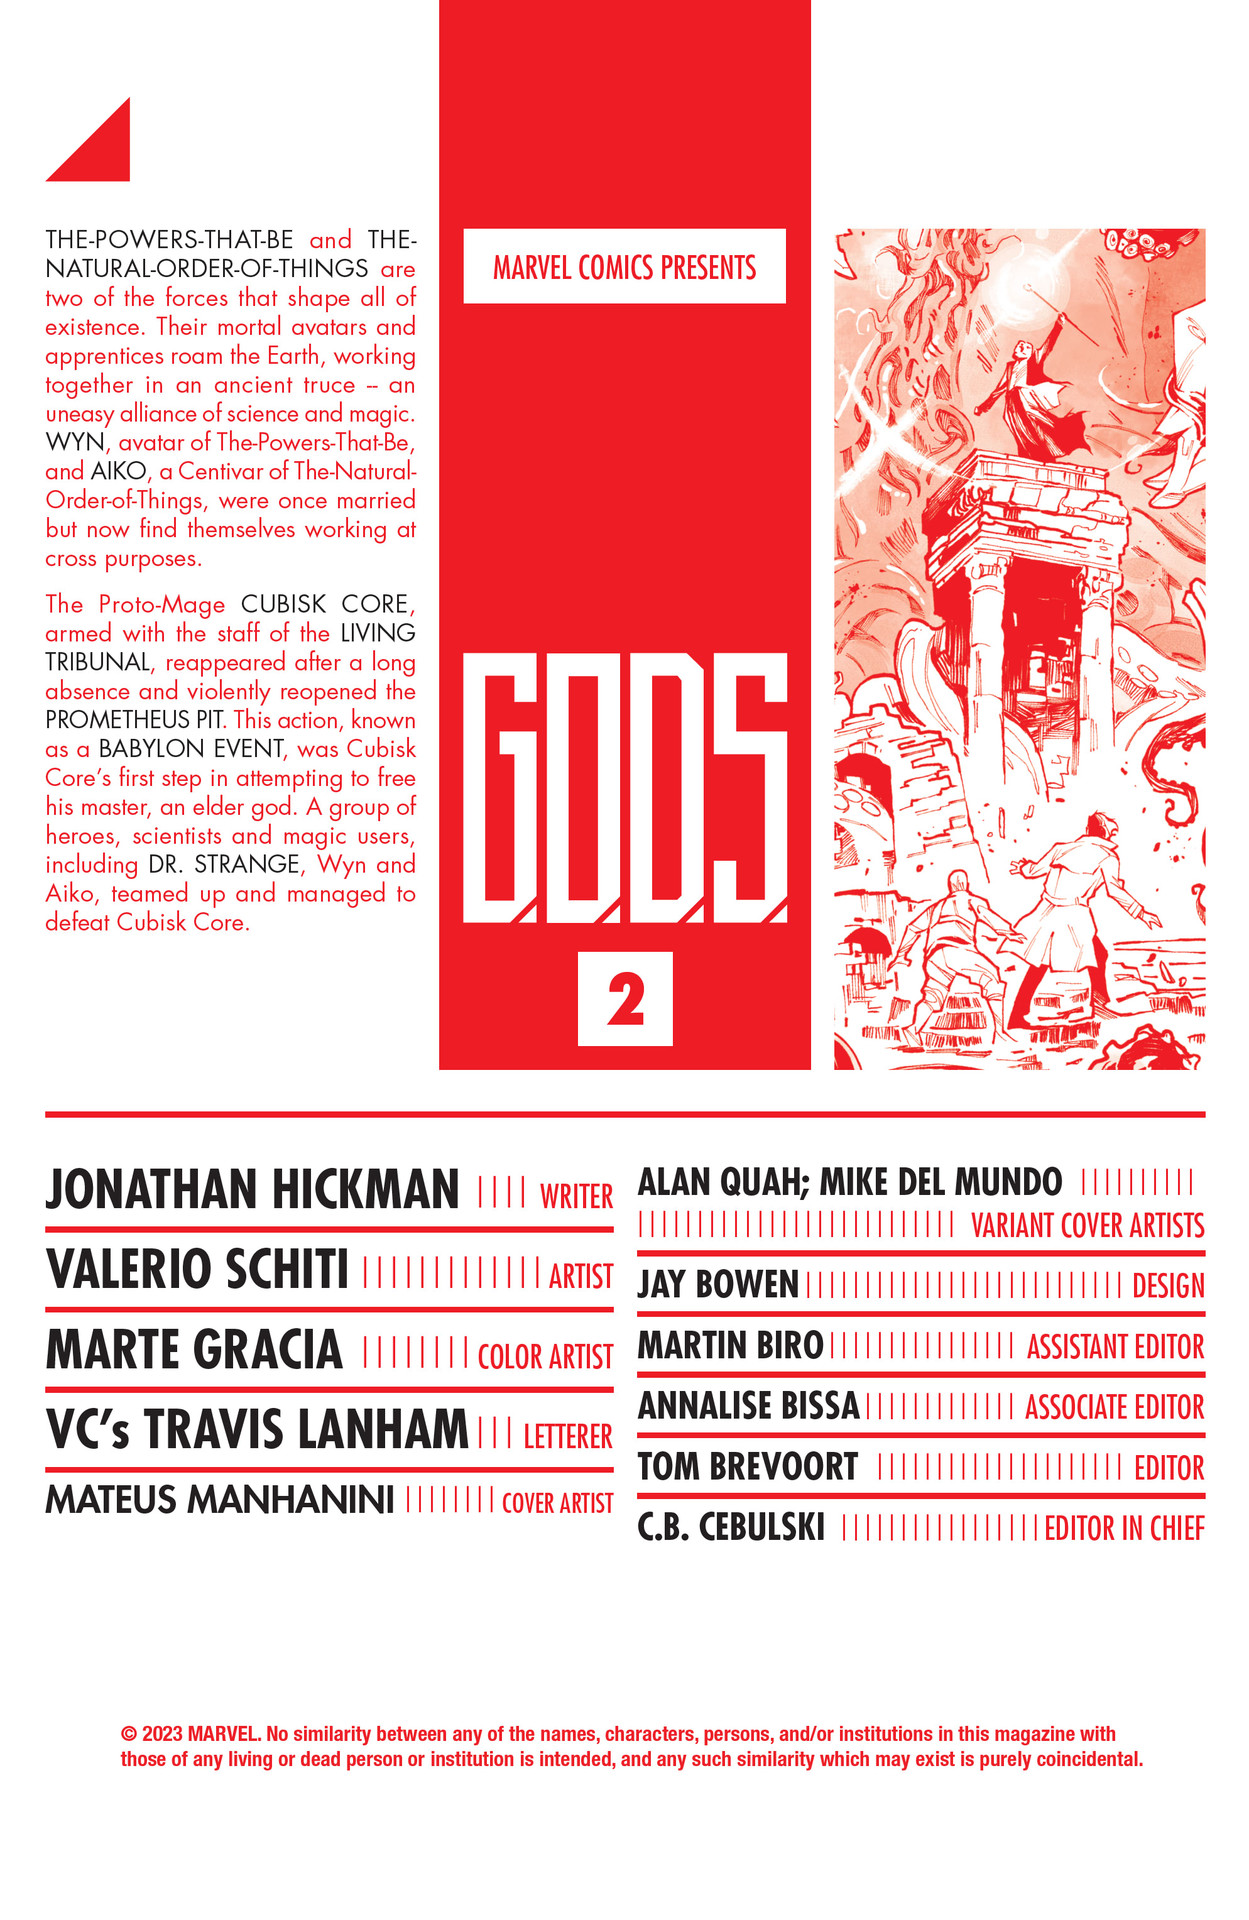 Read online G.O.D.S. comic -  Issue #2 - 2